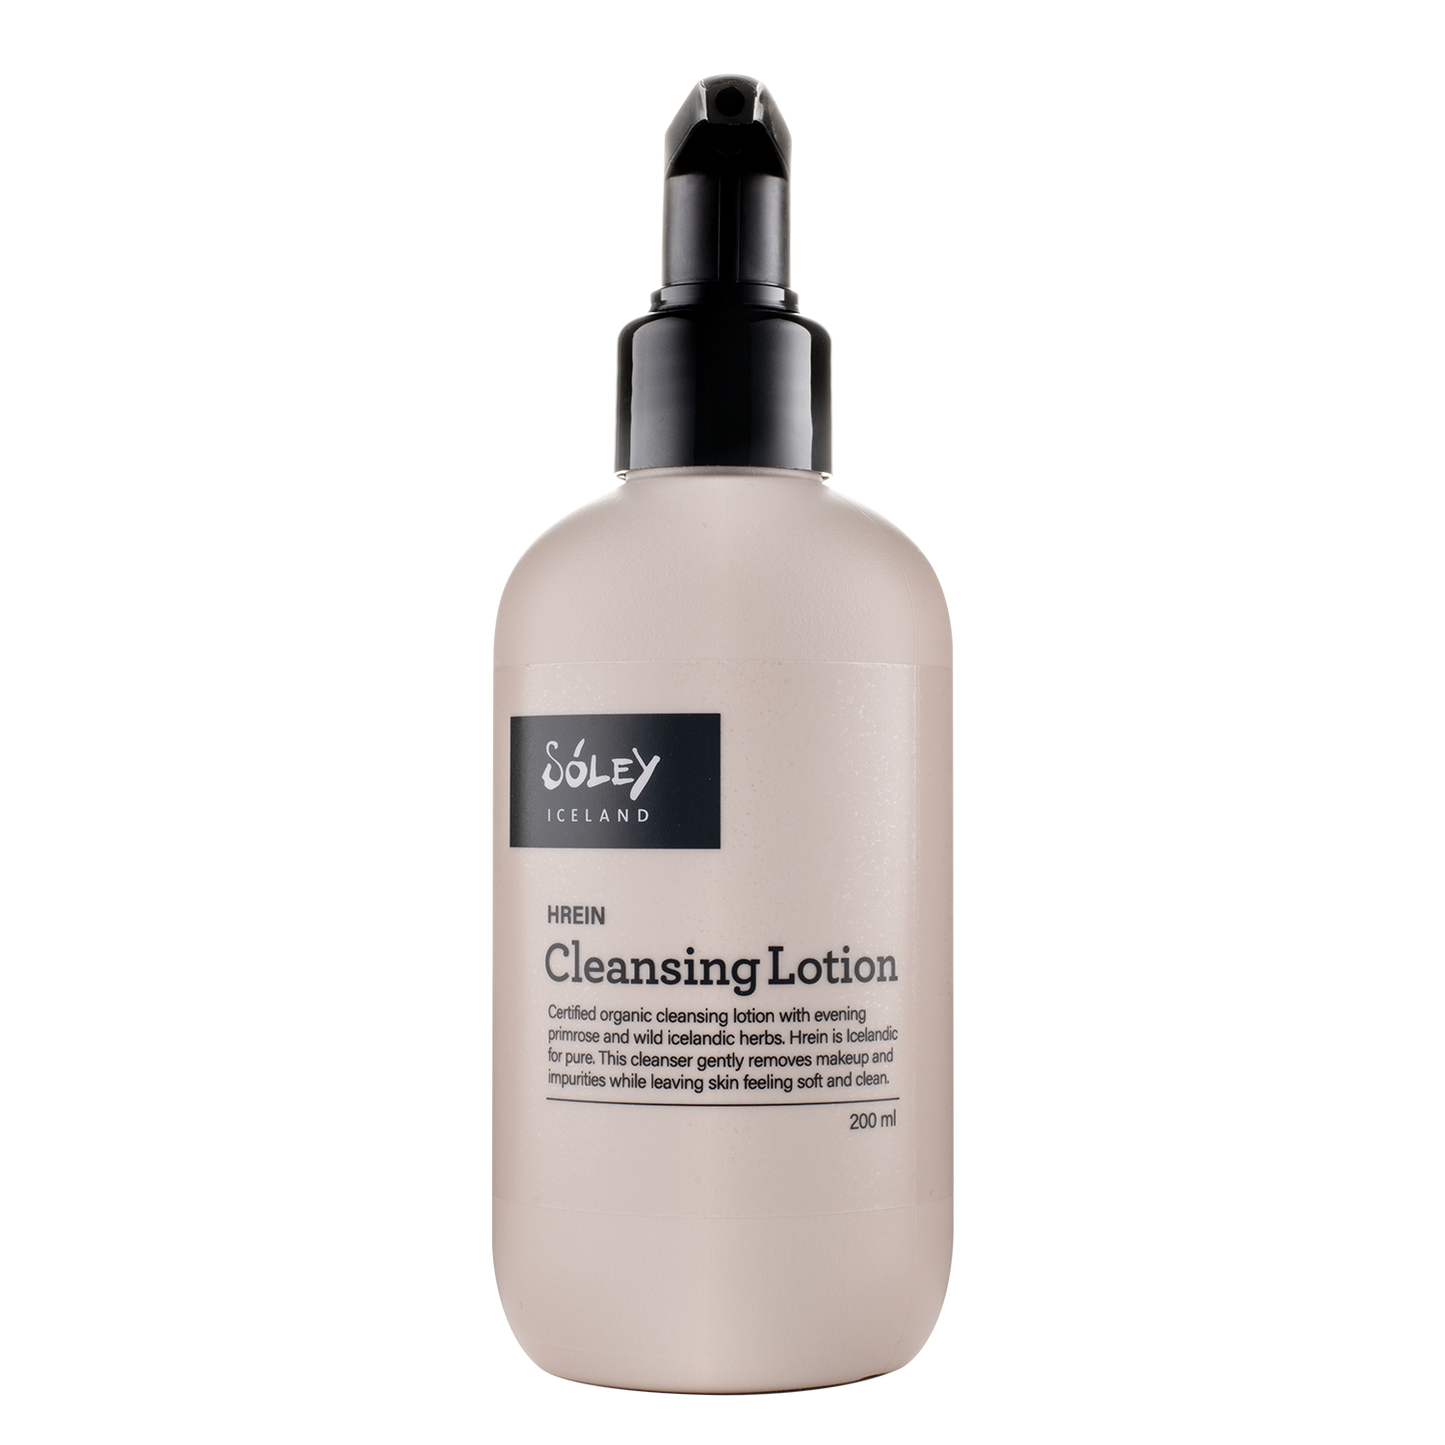 HREIN Cleansing Lotion